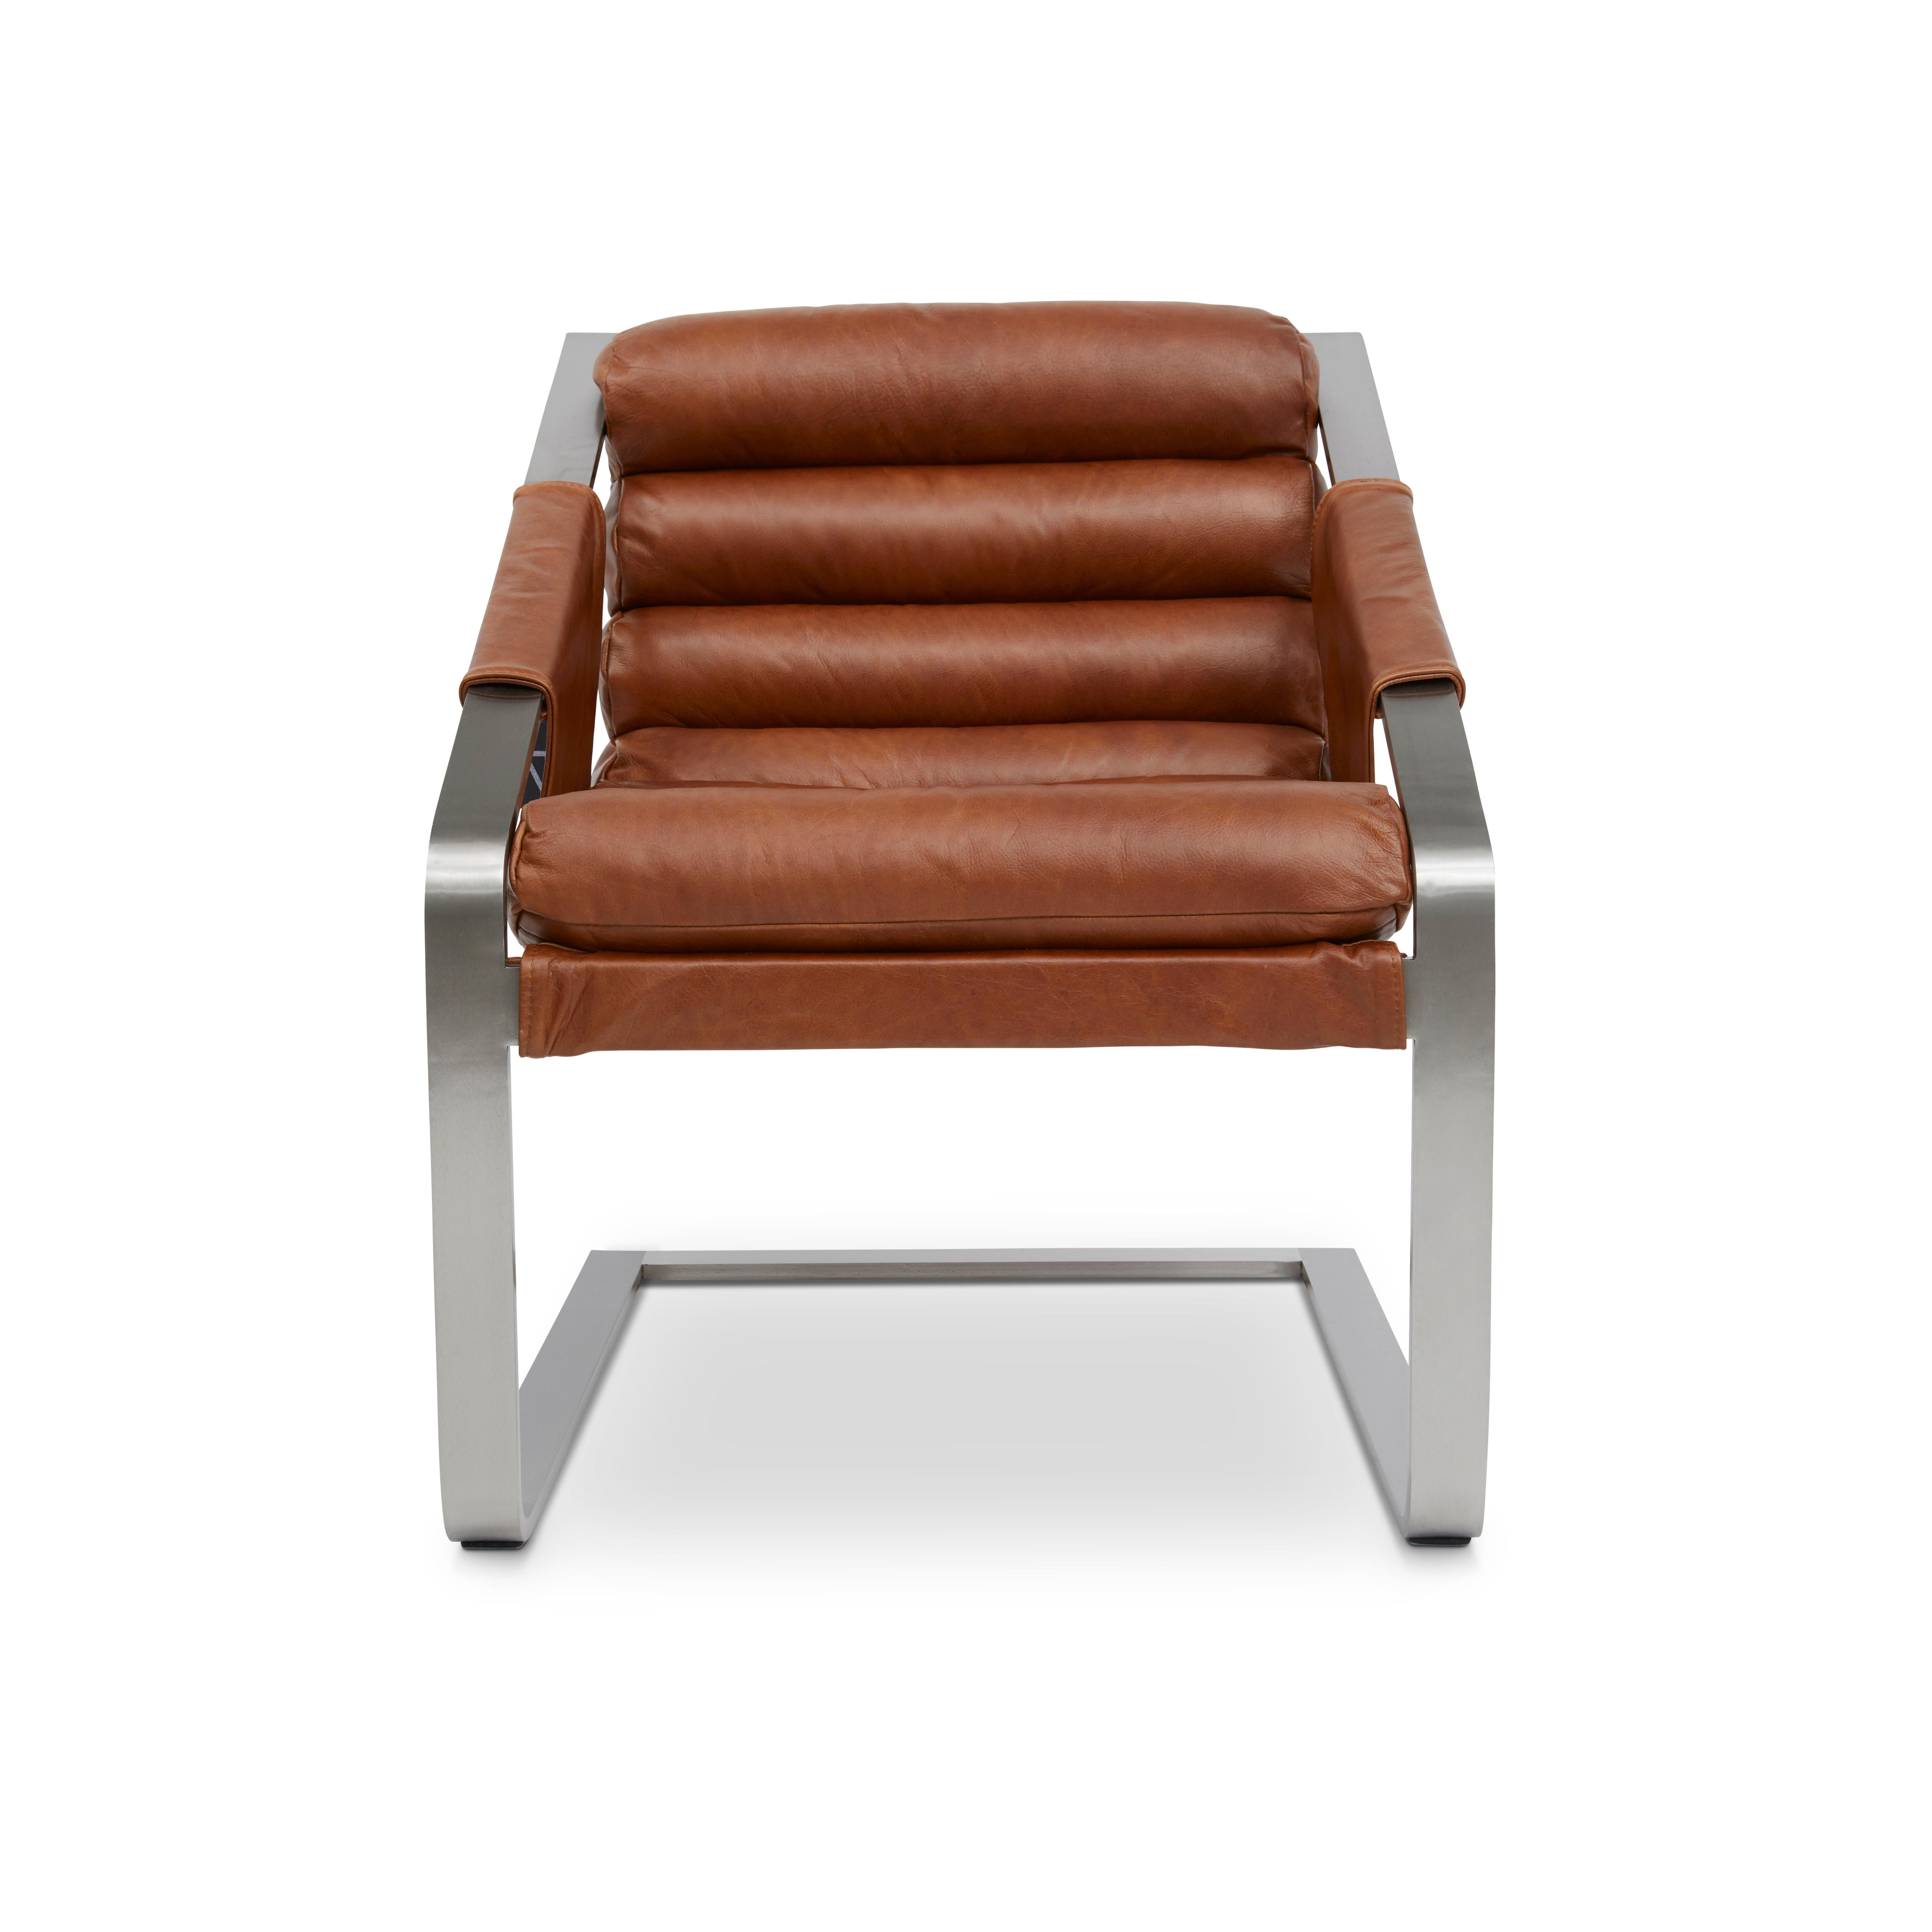 The Patine Chair infuses cool modern metal with the finesse of a past era. With its plush channeled design, the rolls are loved for the comfort and the chic contrast of rich leather with solid stainless steel.

Features
- Fashioned in a stunningly